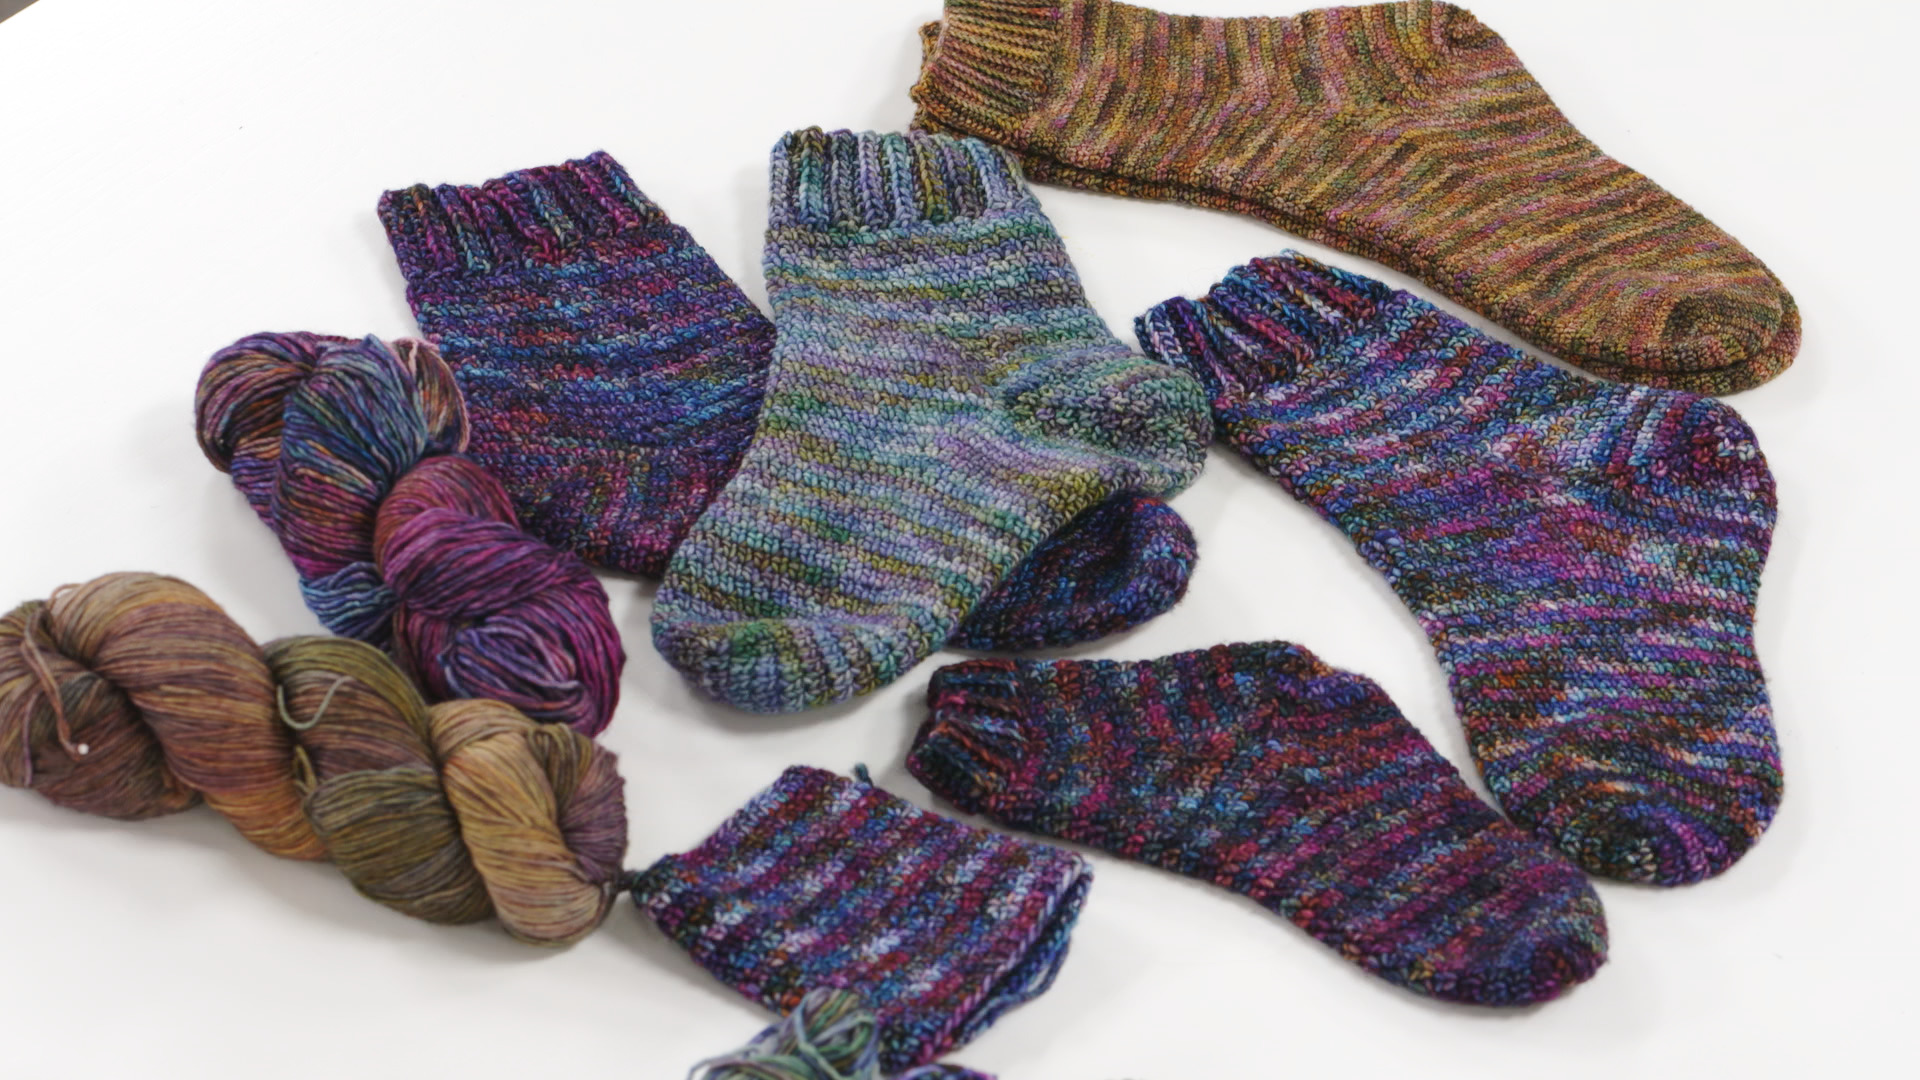 Introduction to the Lakeside Cabin Socks